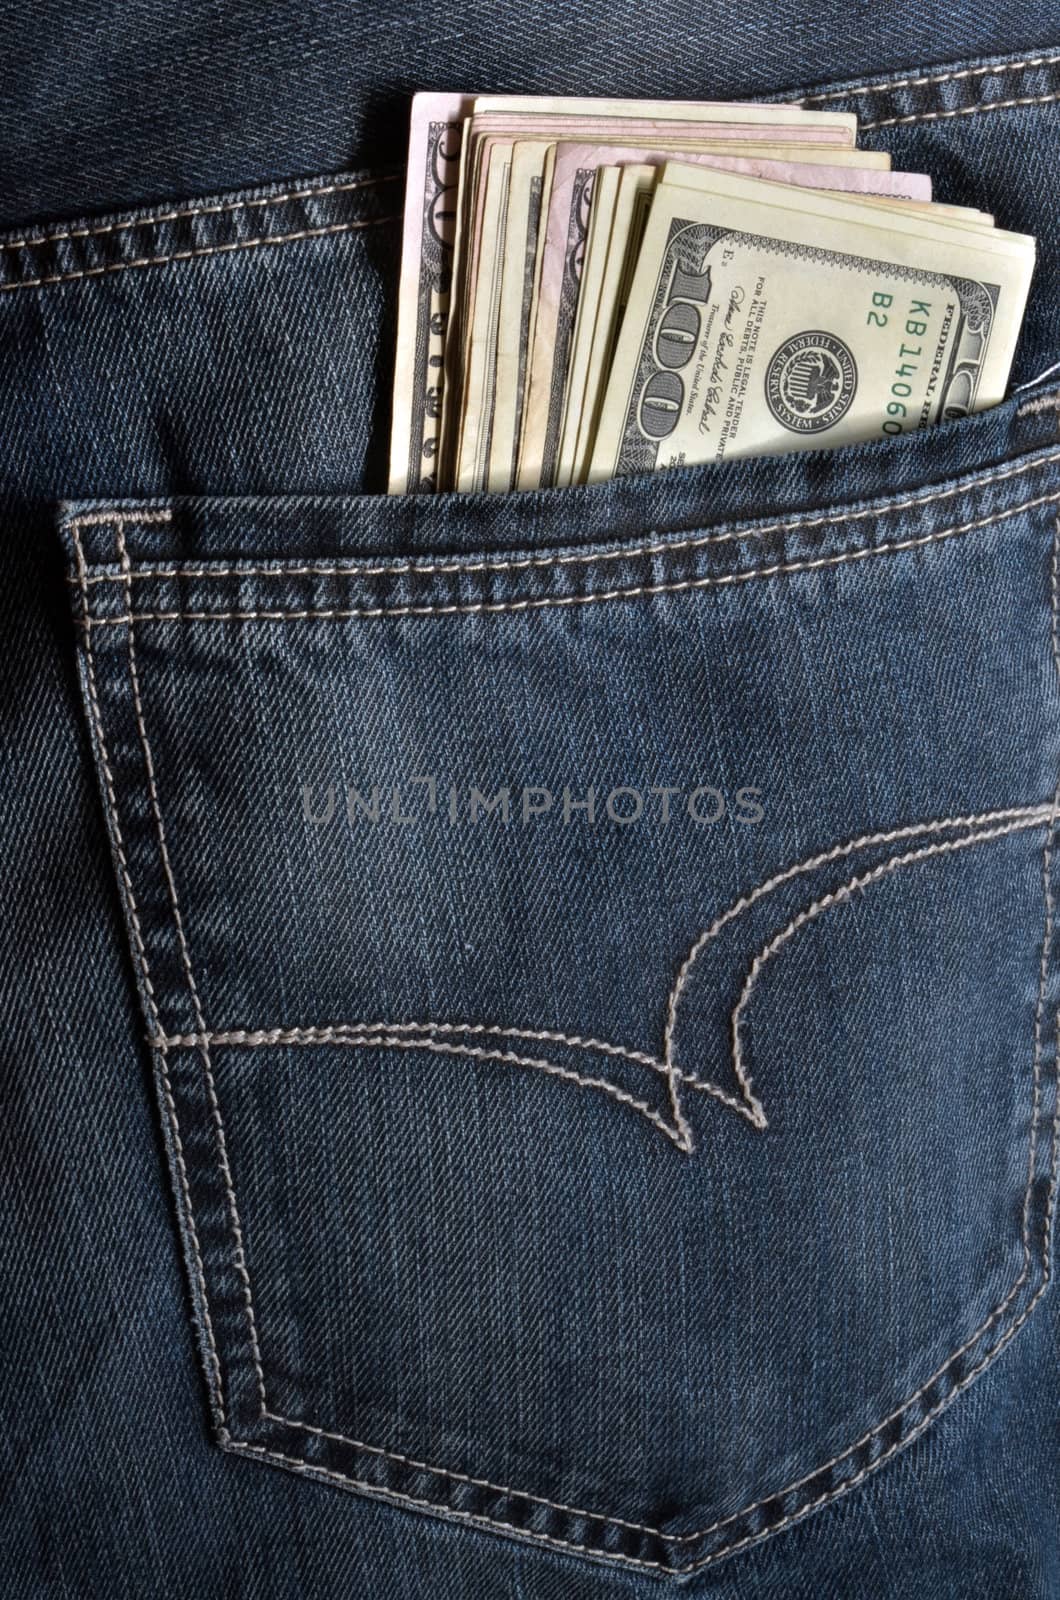 Money in the back pocket by Vectorex